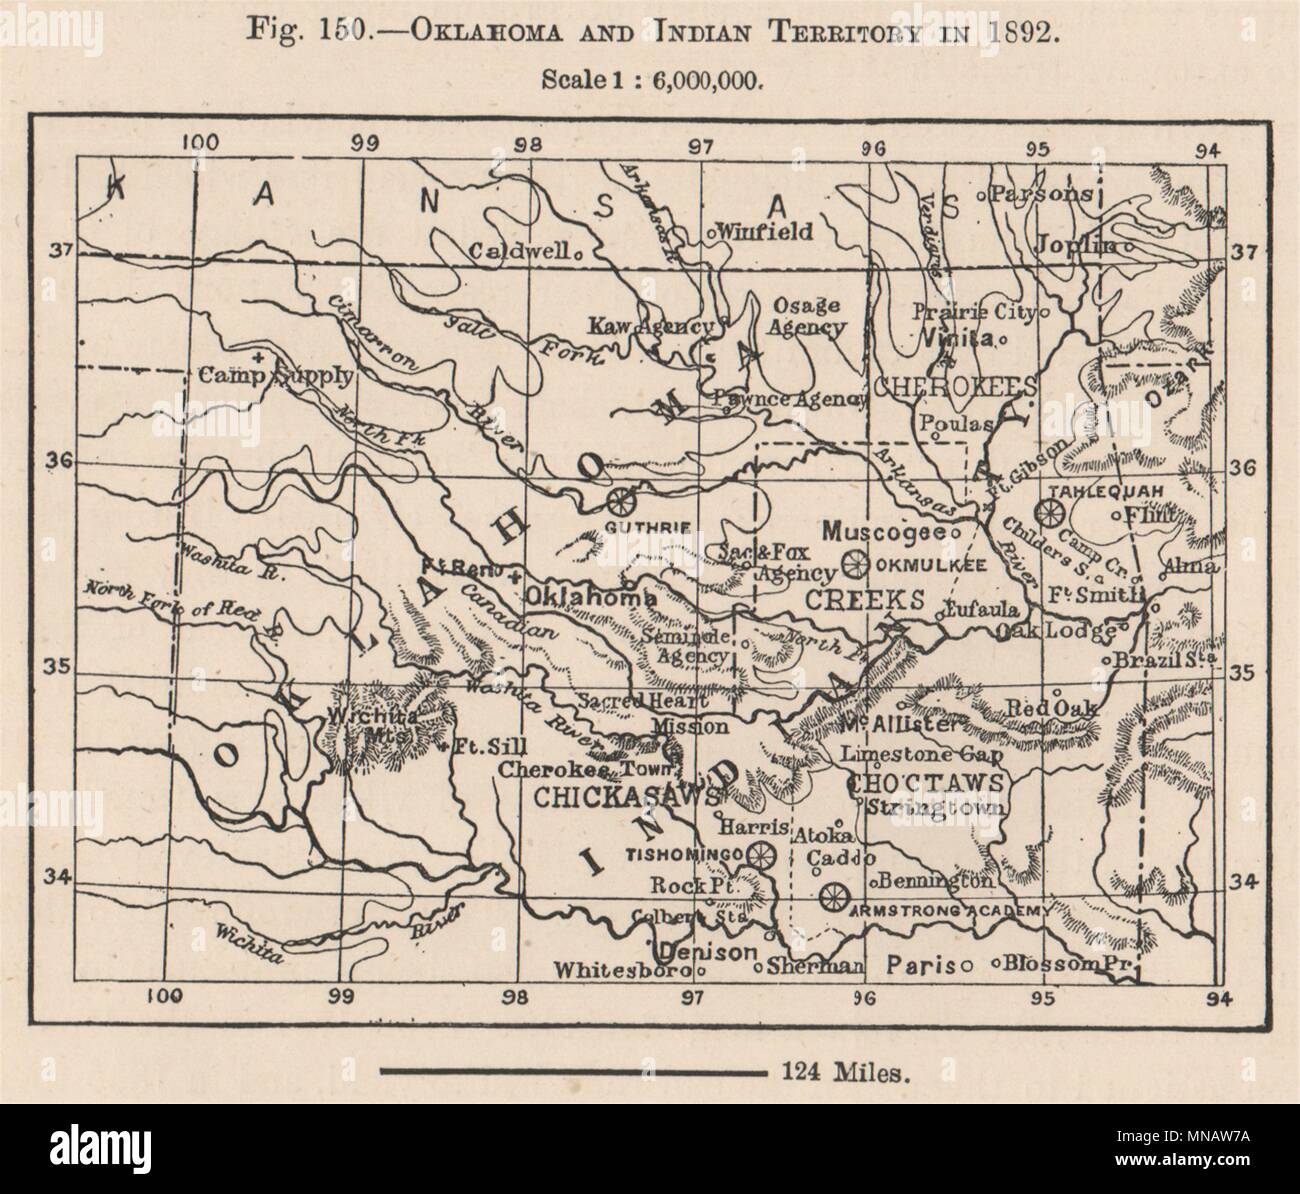 Oklahoma and Indian Territory in 1892 1885 old antique vintage map plan chart Stock Photo